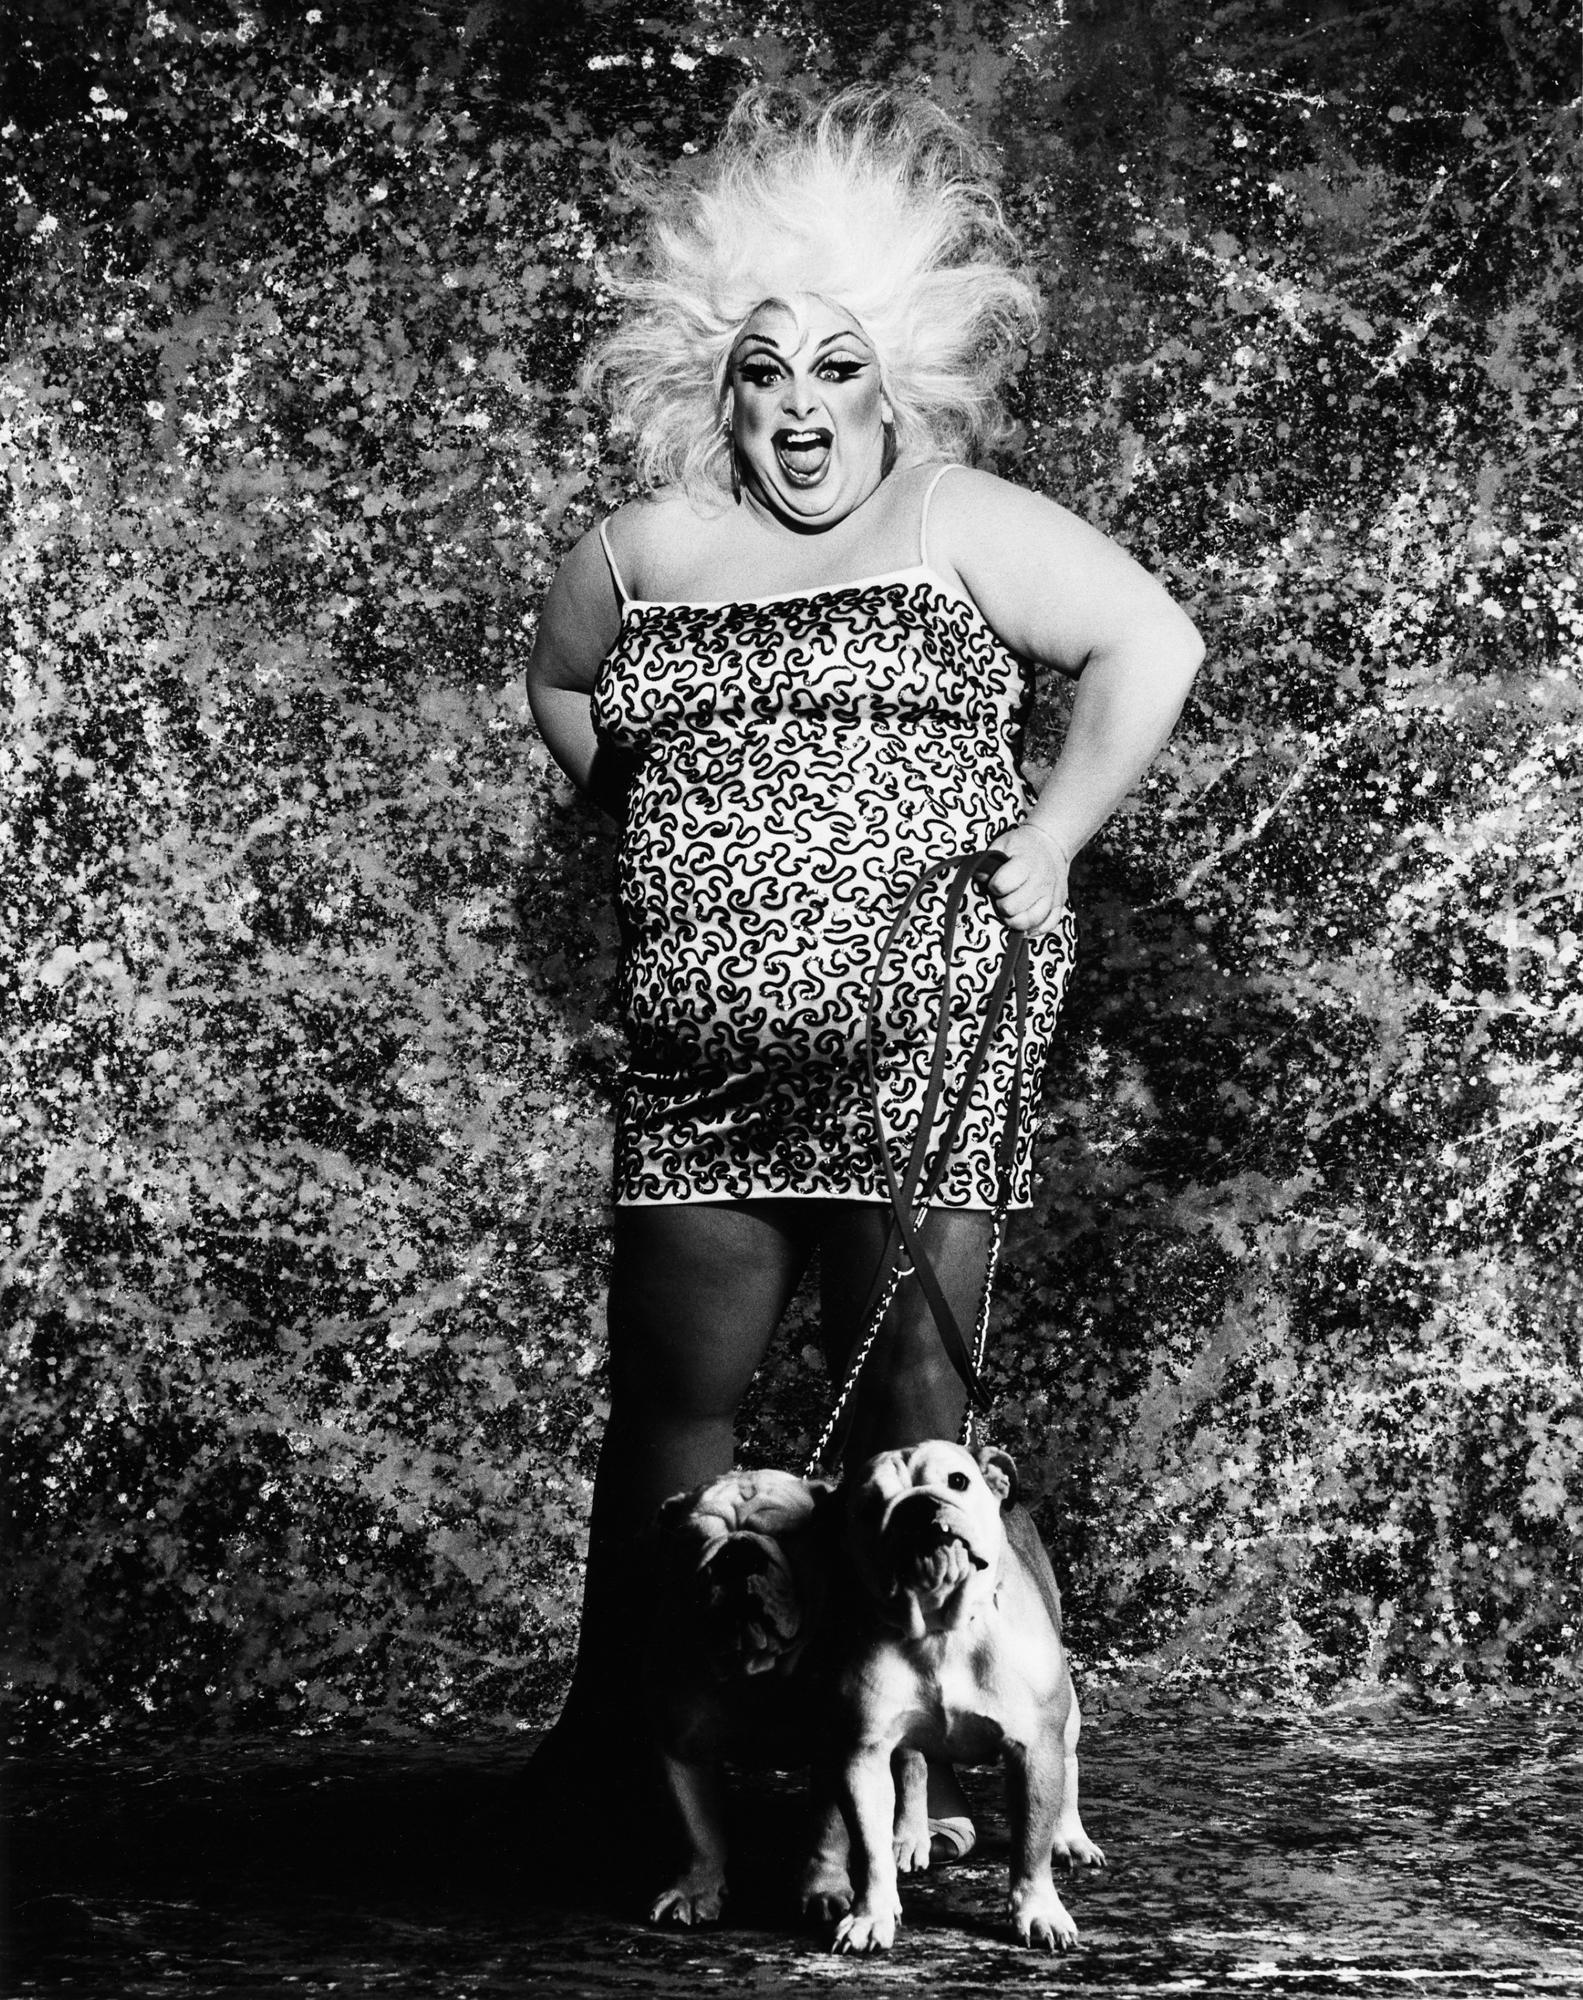 Divine and Bulldogs, 16x20, 21st Century, Contemporary, Celebrity, Photography